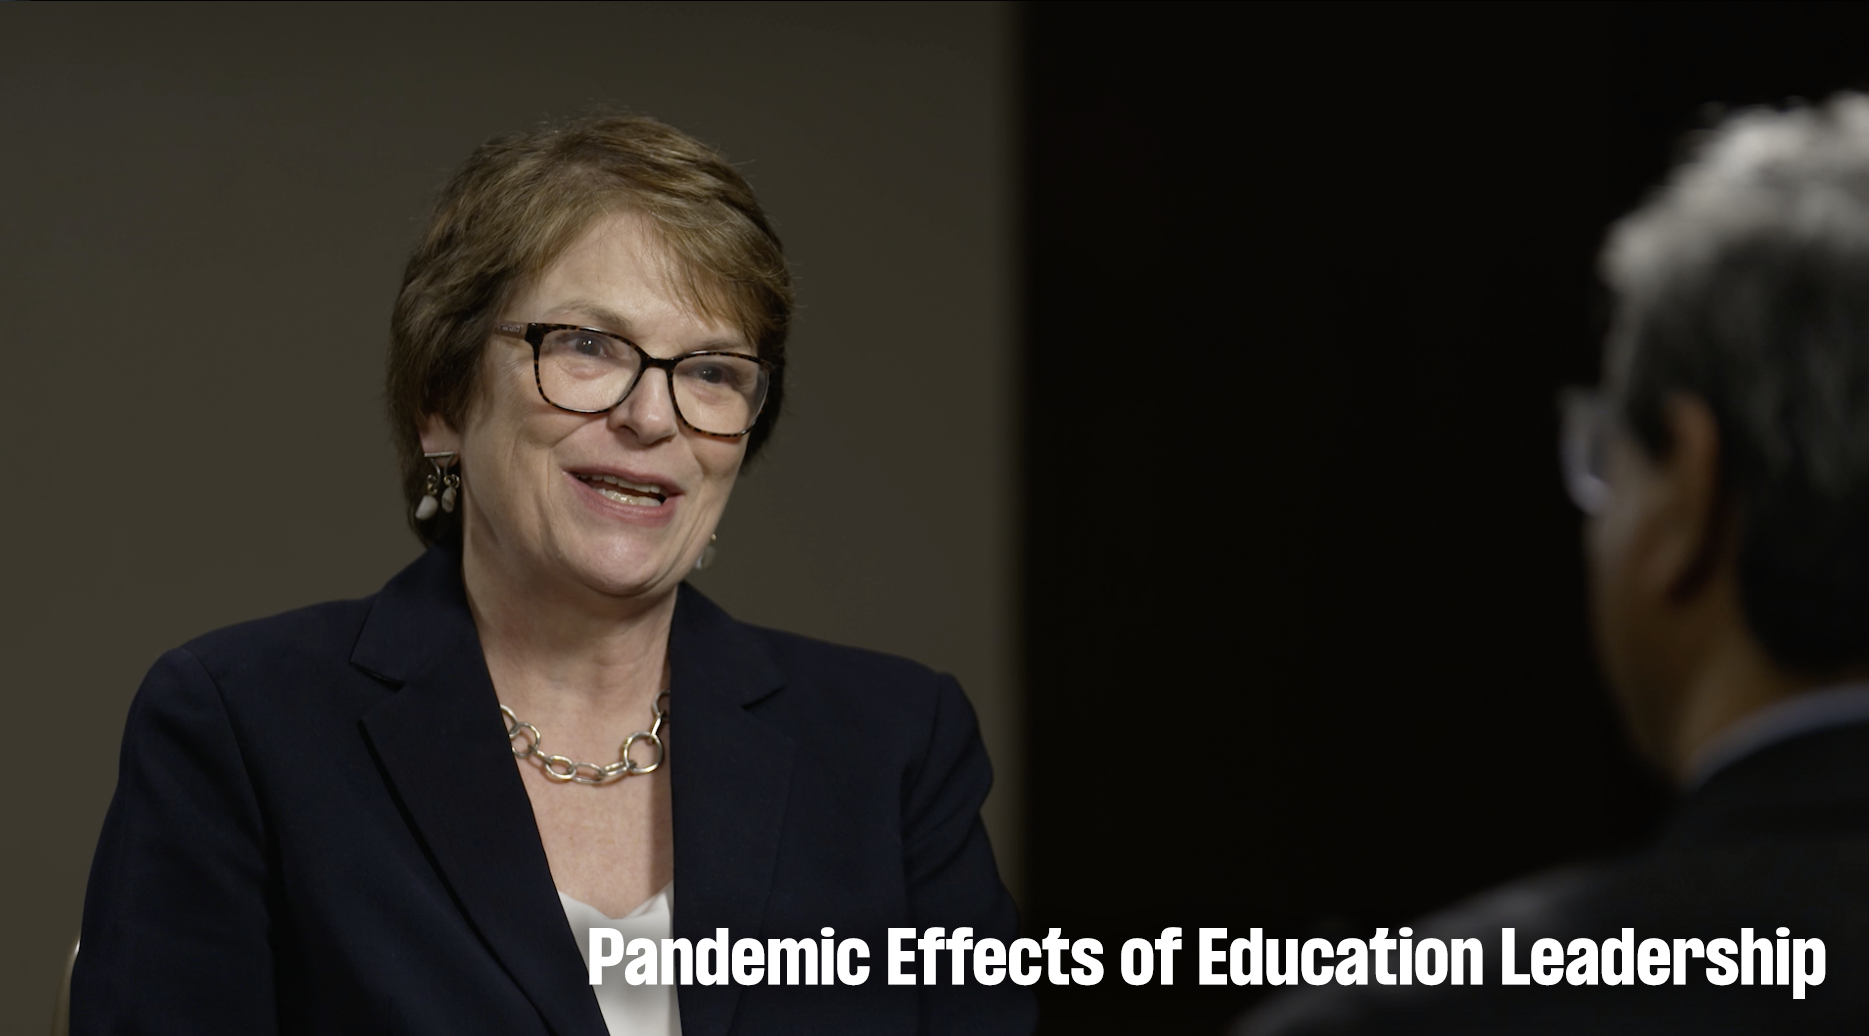 Pandemic Effects of Education Leadership